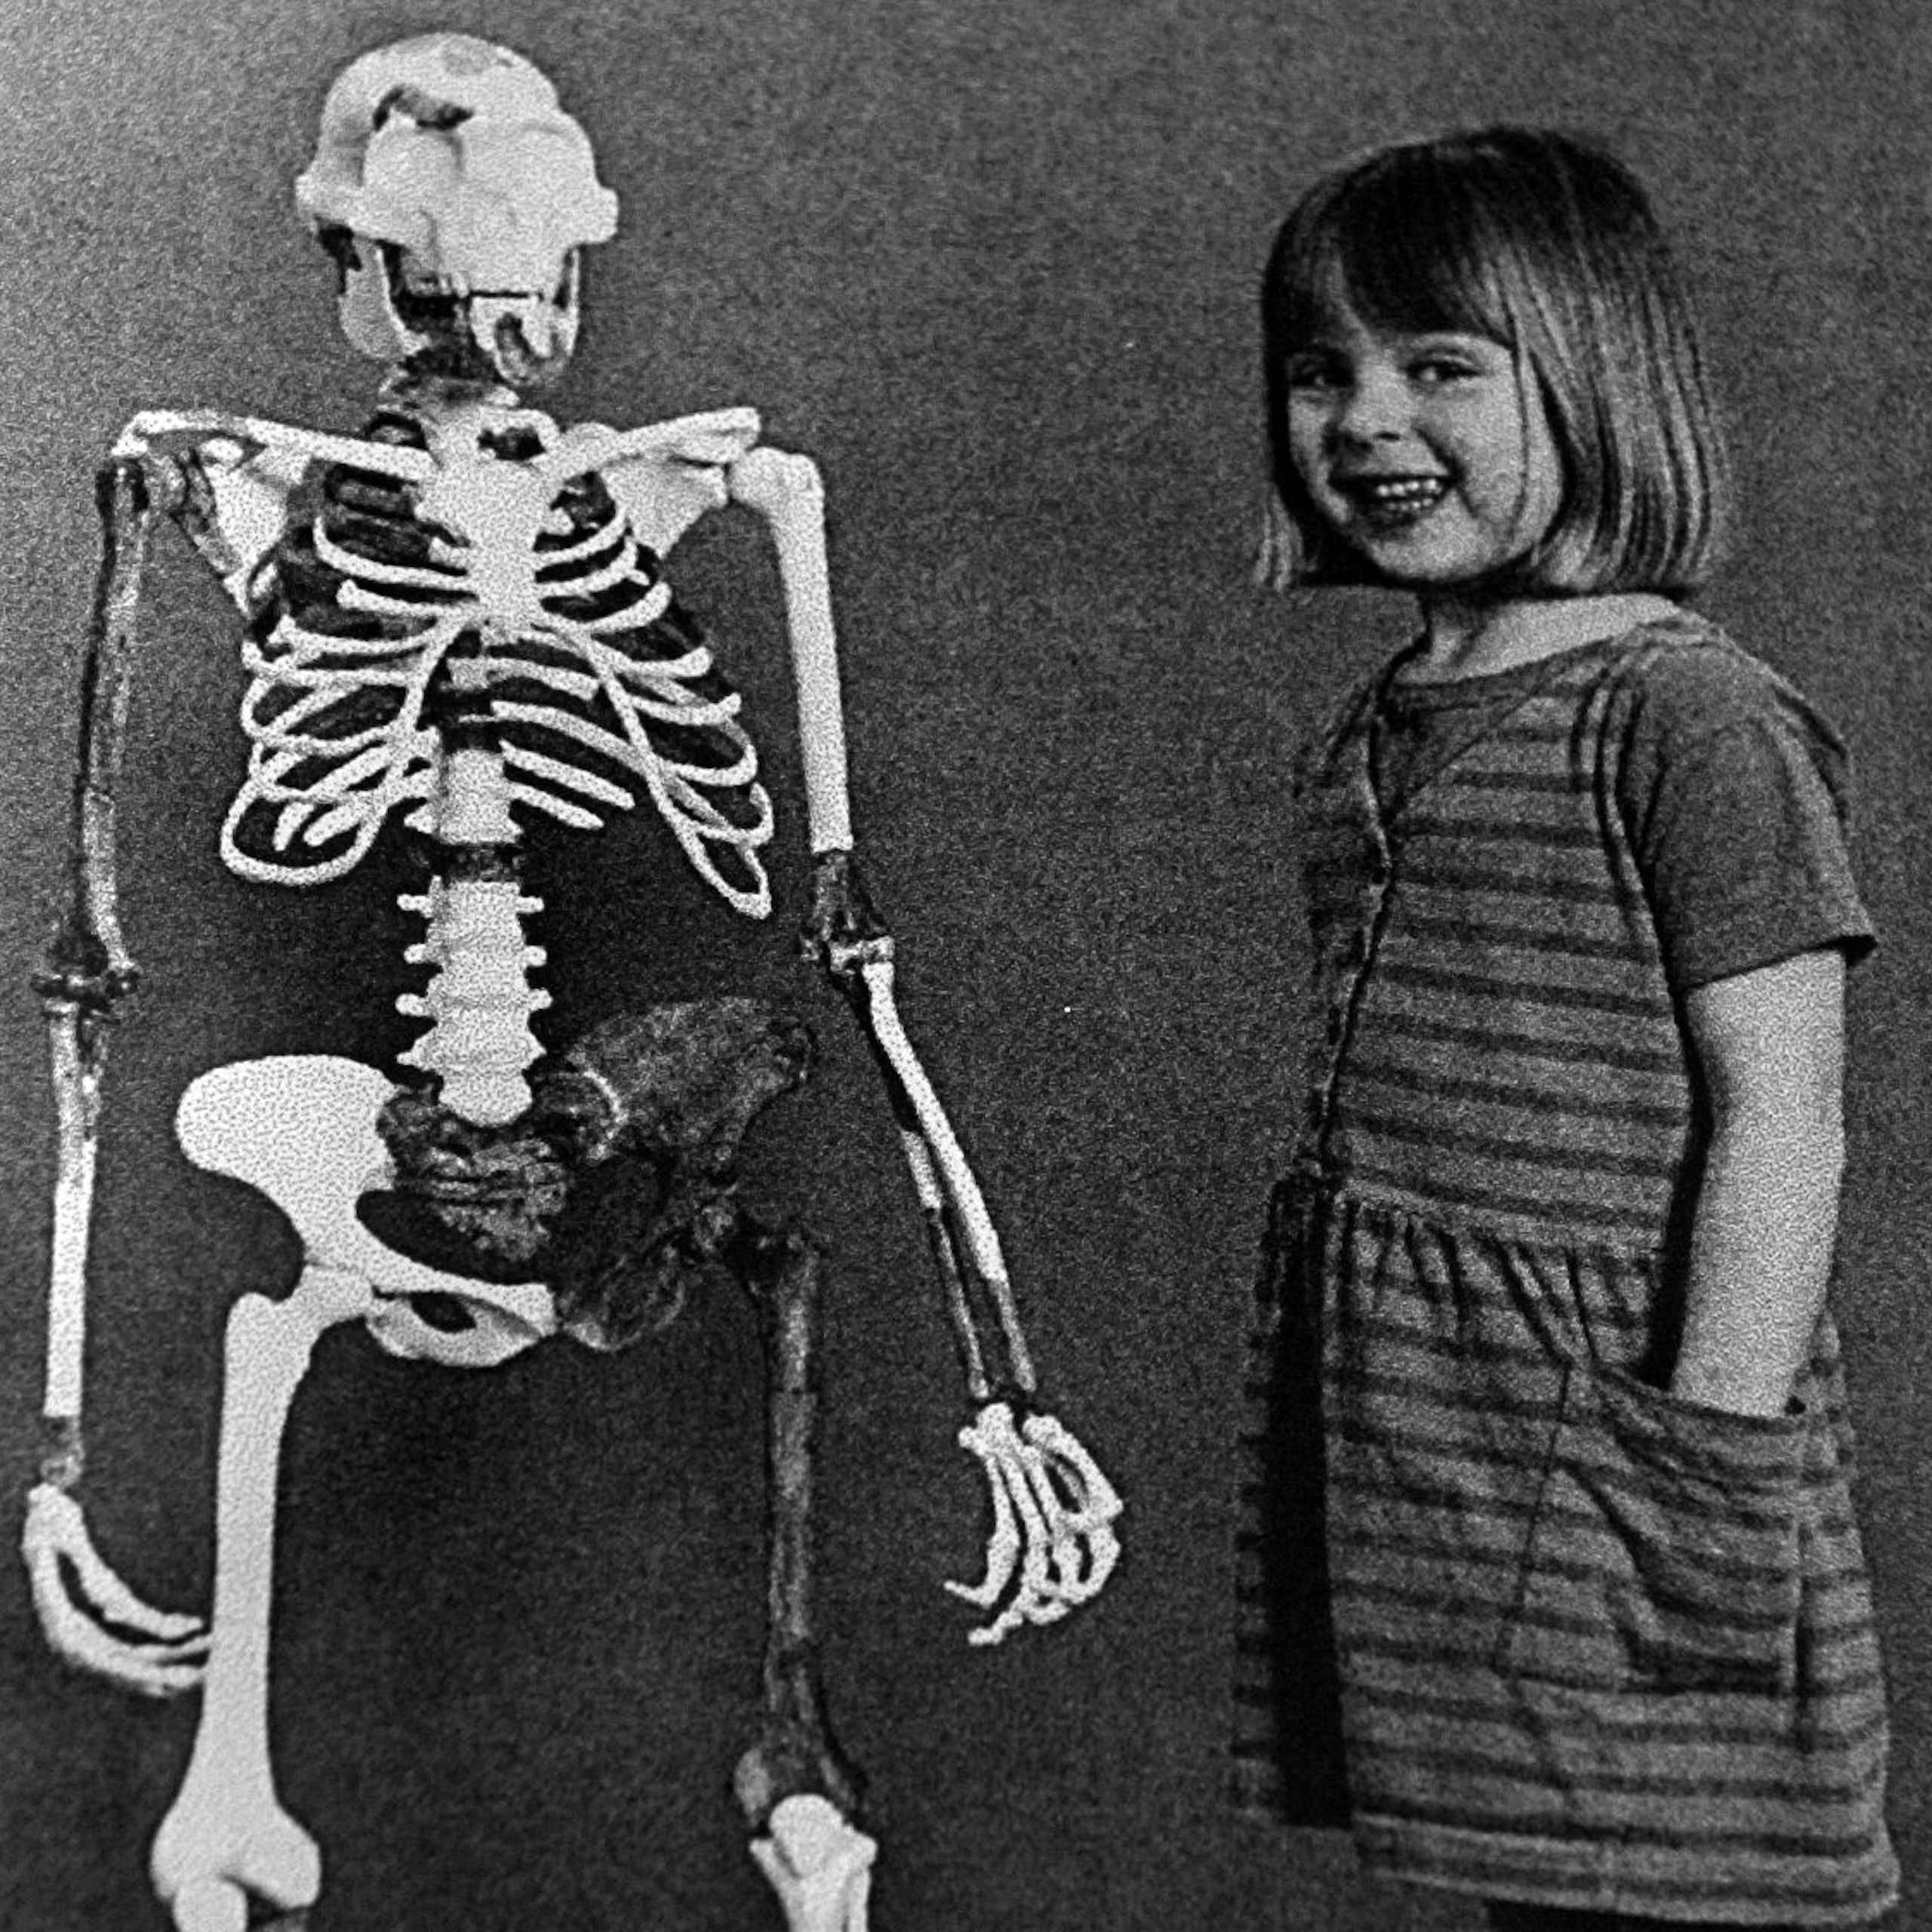 Lucy, discovered 50 years ago in Ethiopia, stood just 3.5 feet tall − but she still towers over our understanding of human origins